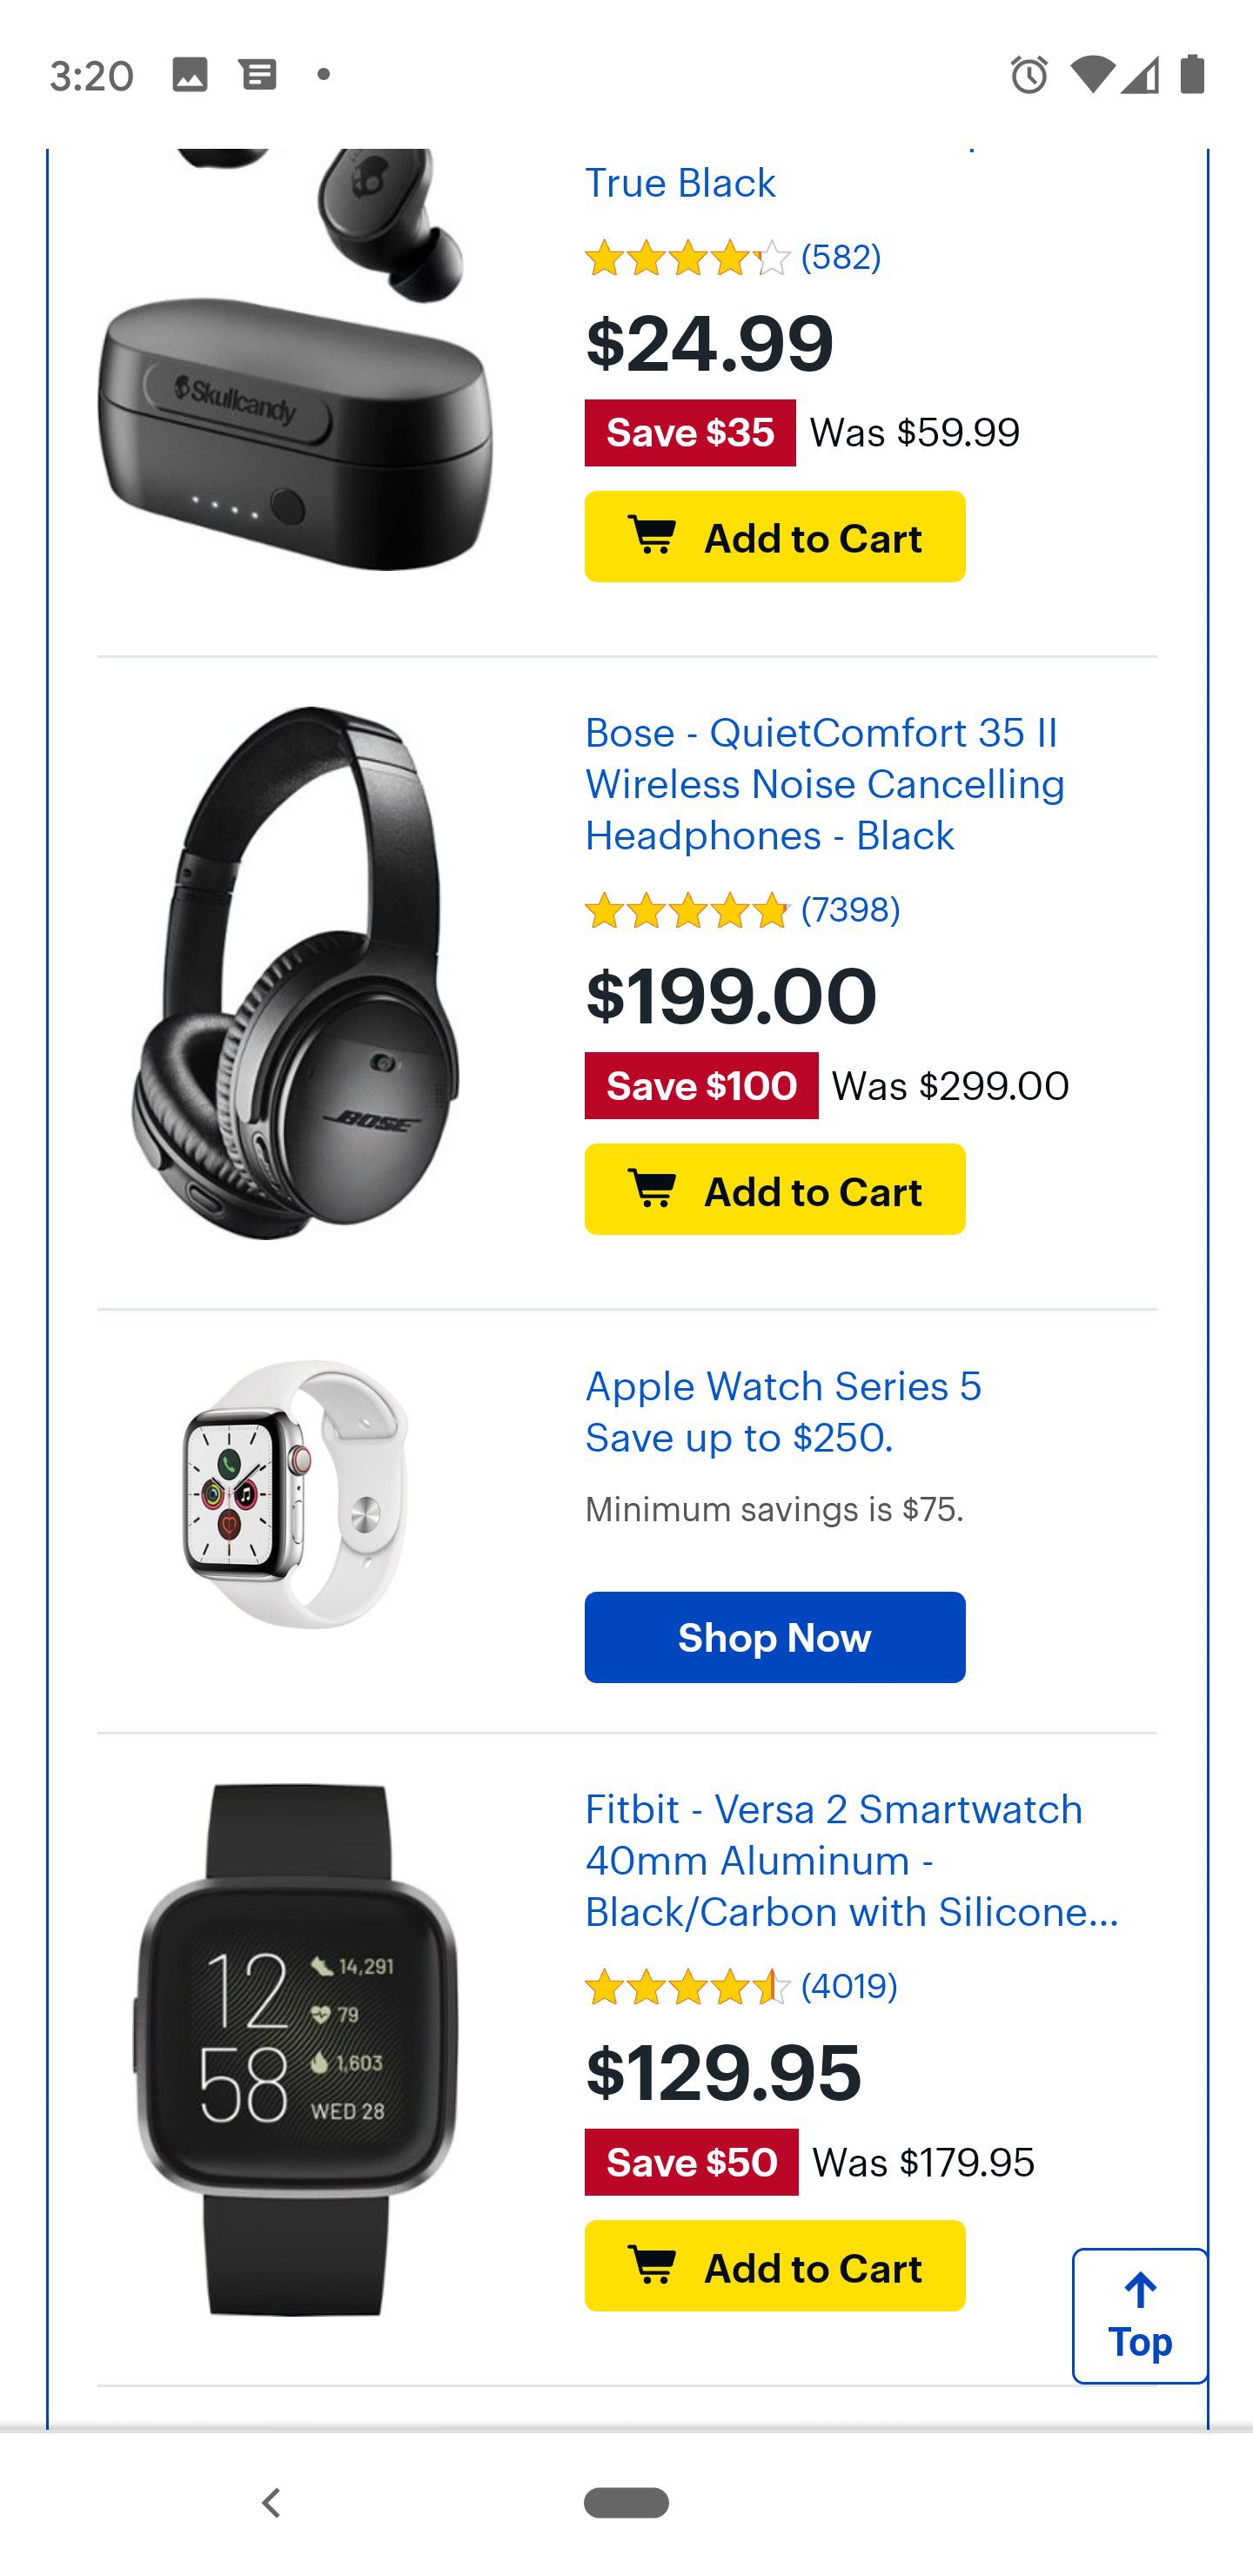 Bose noise canceling Bluetooth headphones great deal